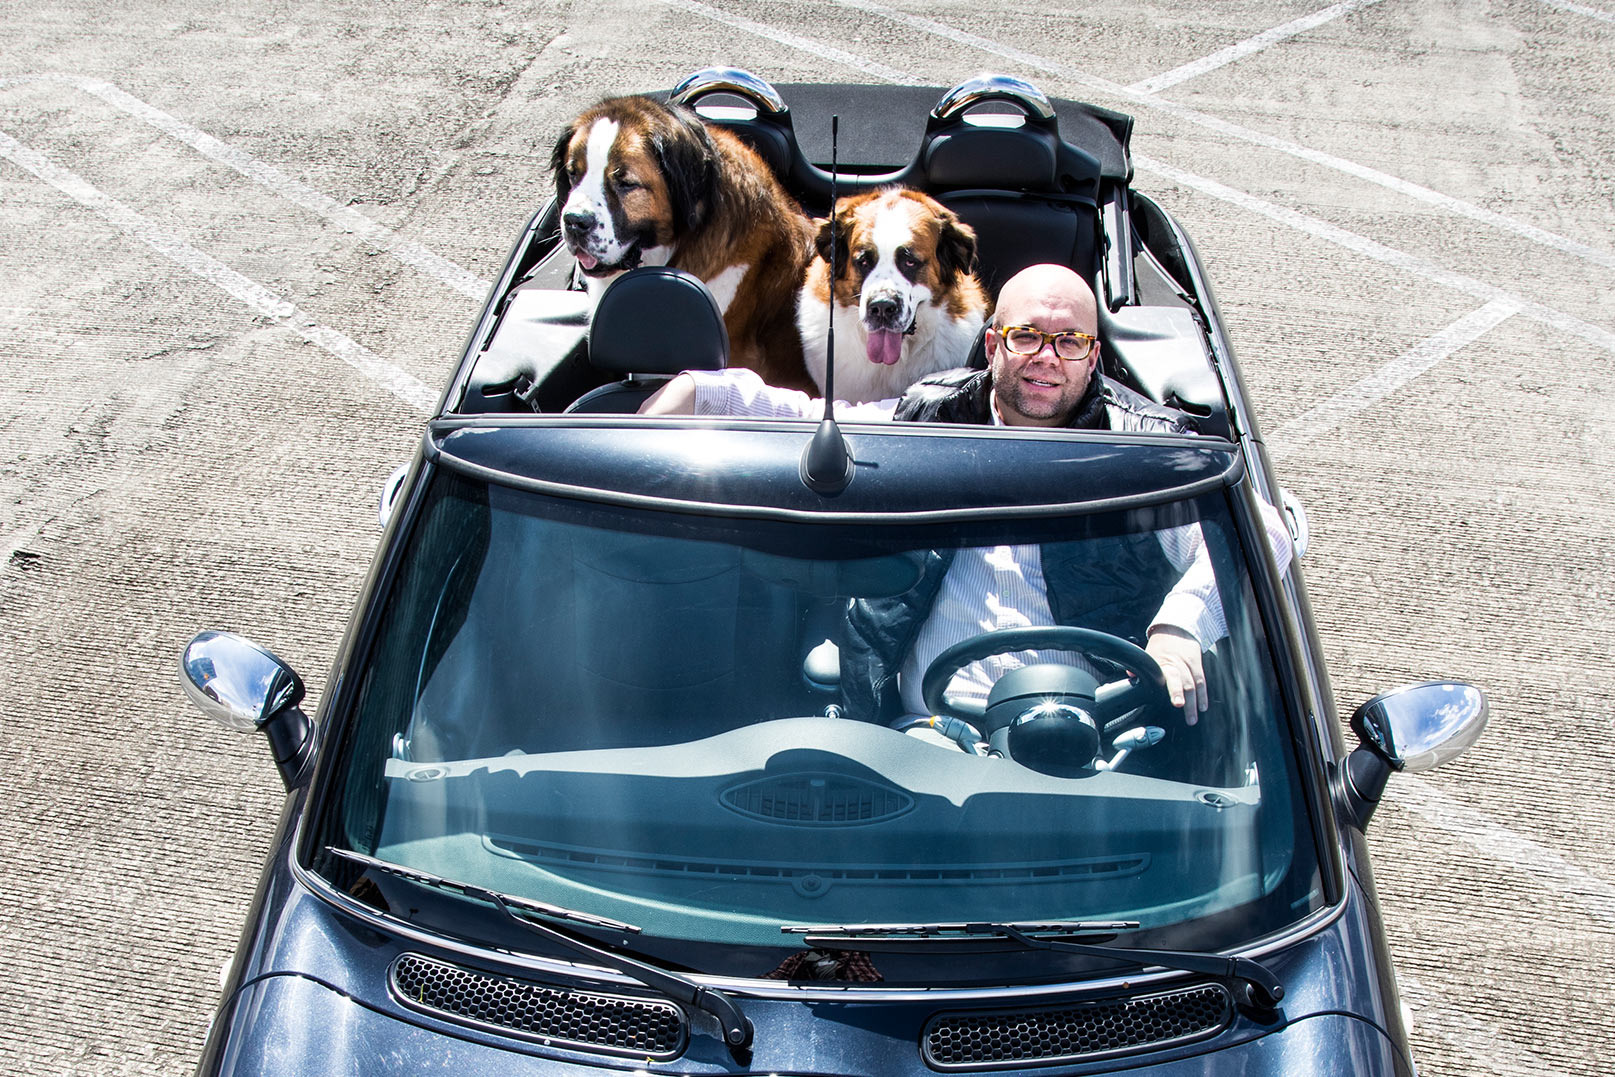 Scott with his dogs in his car